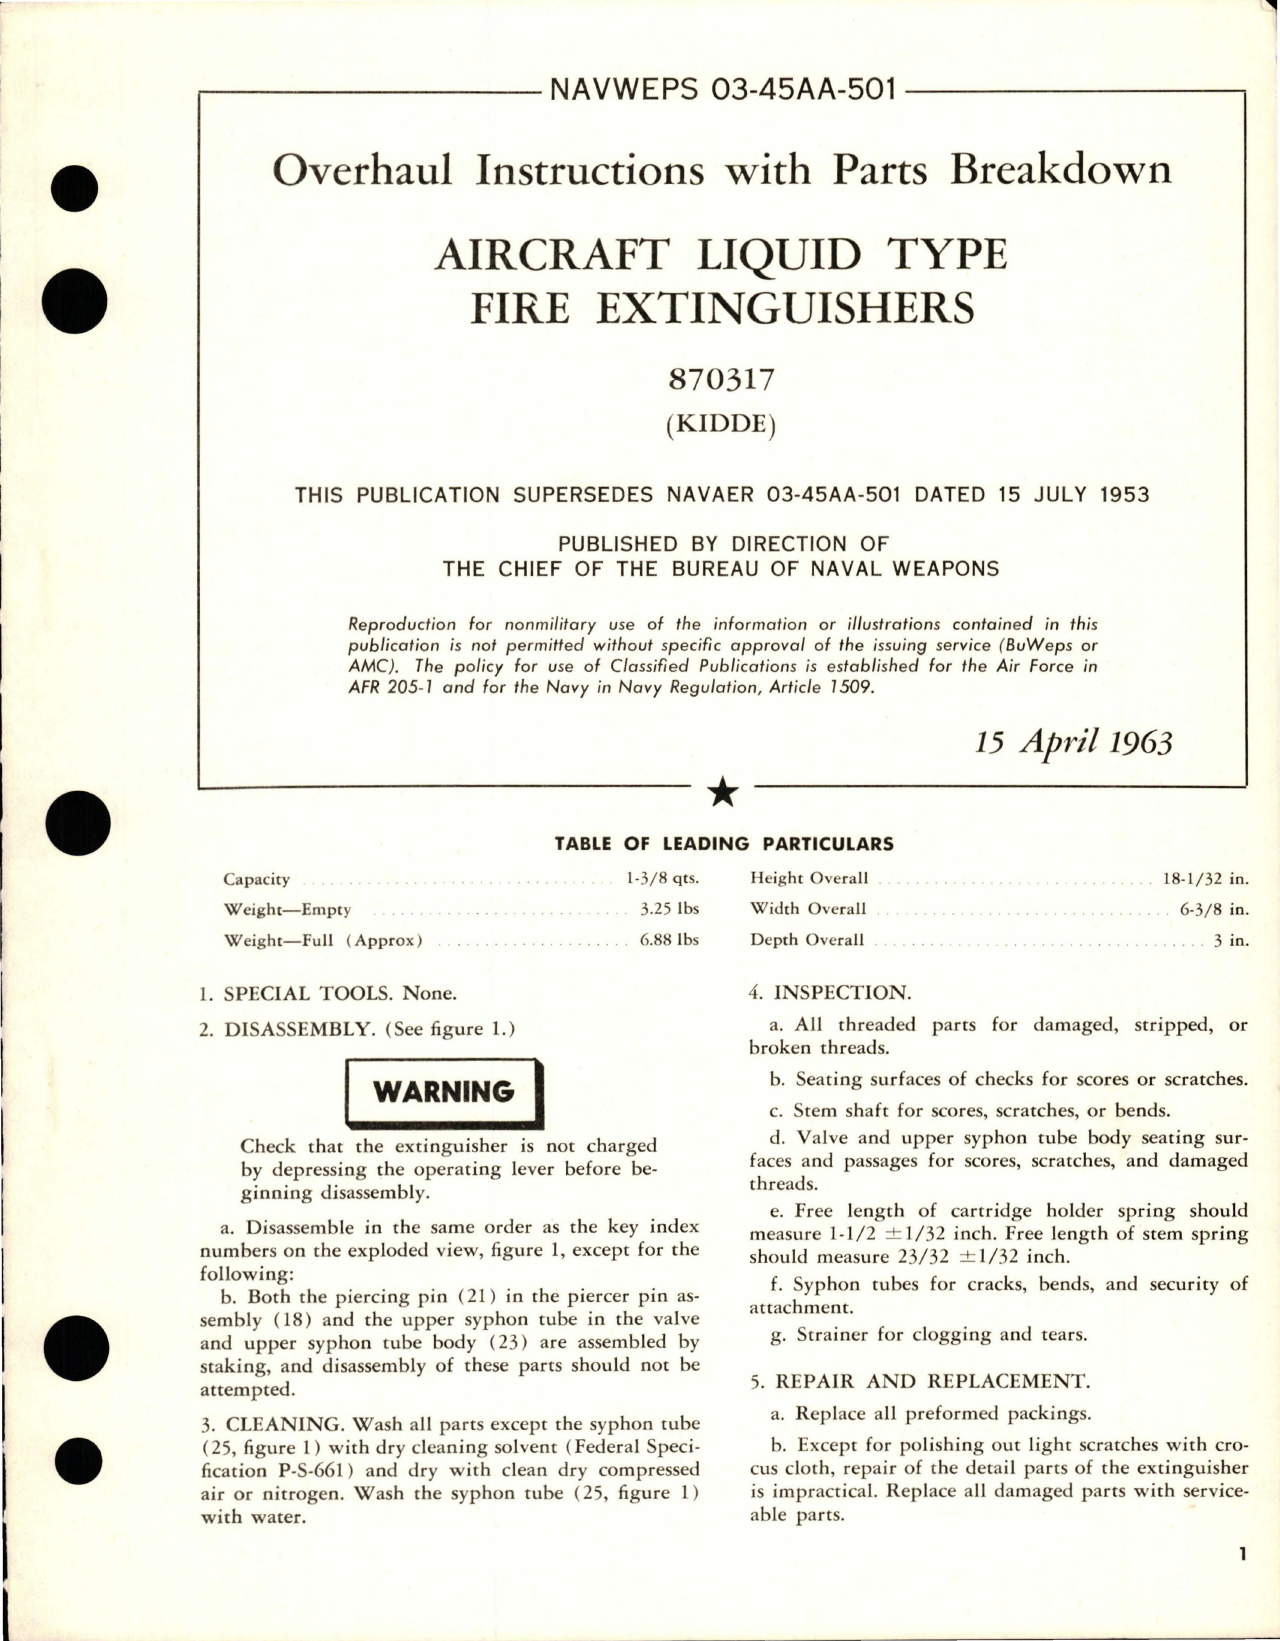 Sample page 1 from AirCorps Library document: Overhaul Instructions with Parts Breakdown for Liquid Type Fire Extinguishers - 870317